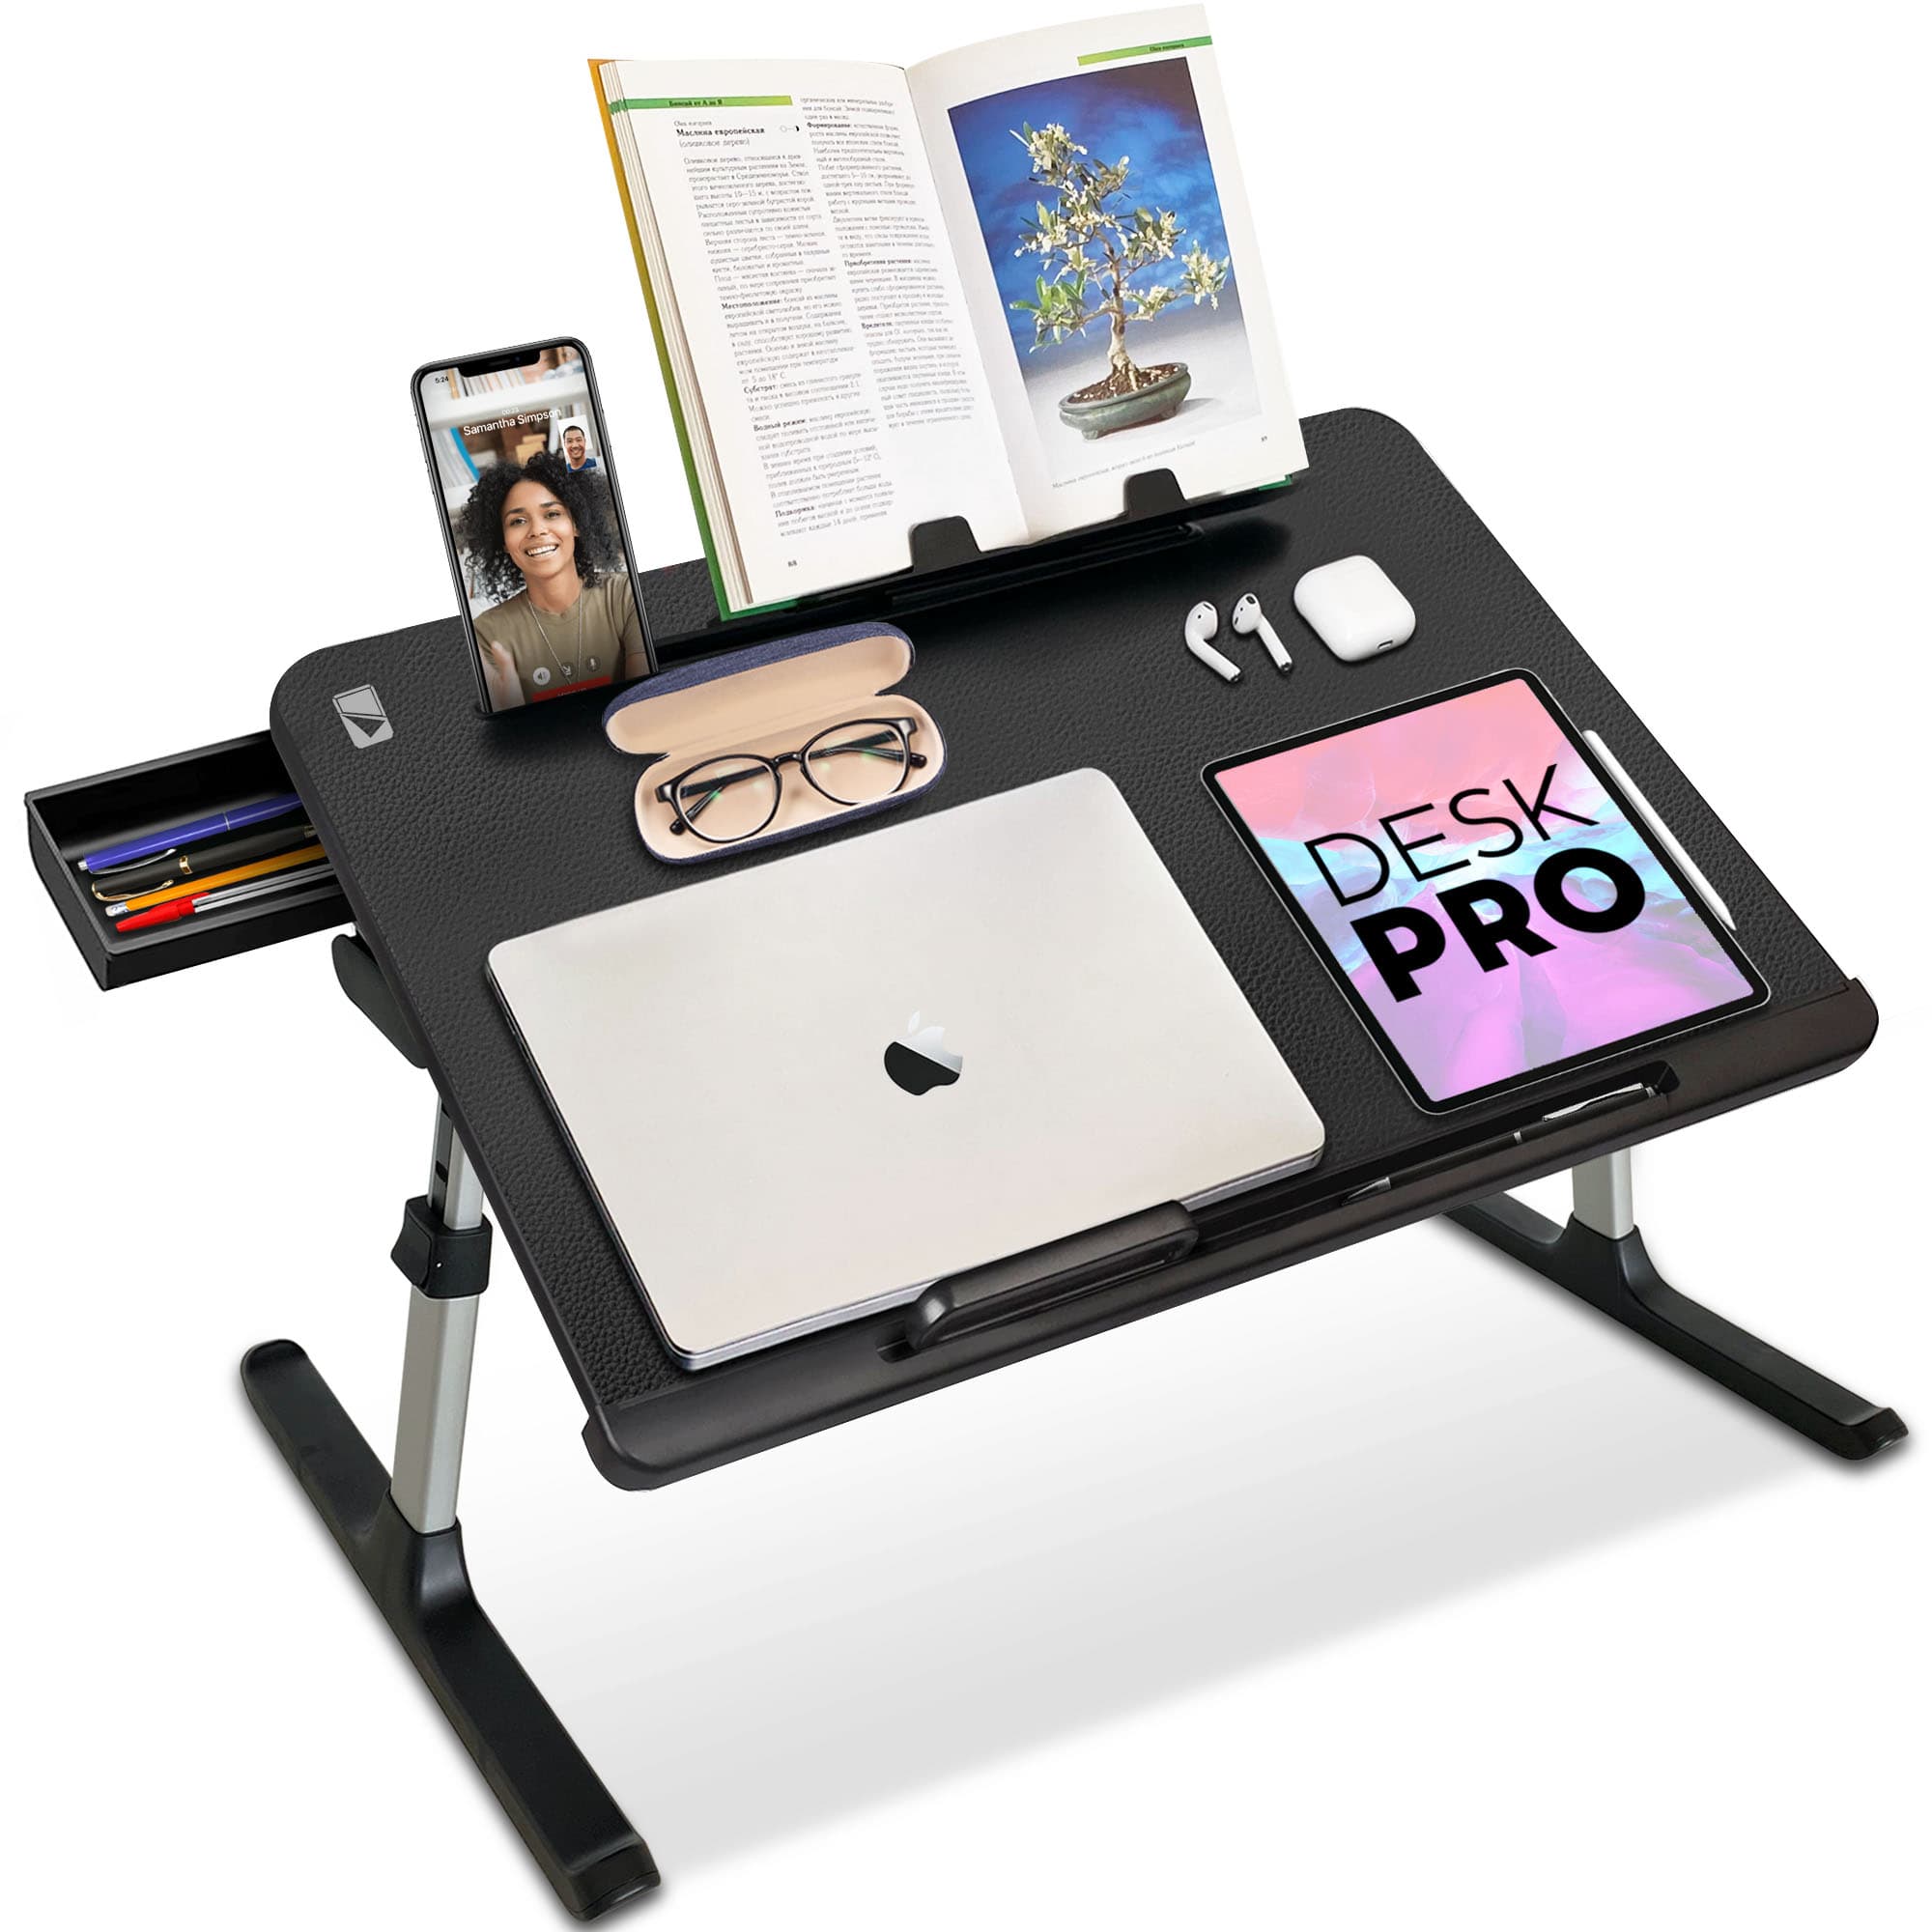 Lap Portable Desk Home XL-Large Oversized 24 inches Wide Table Tray